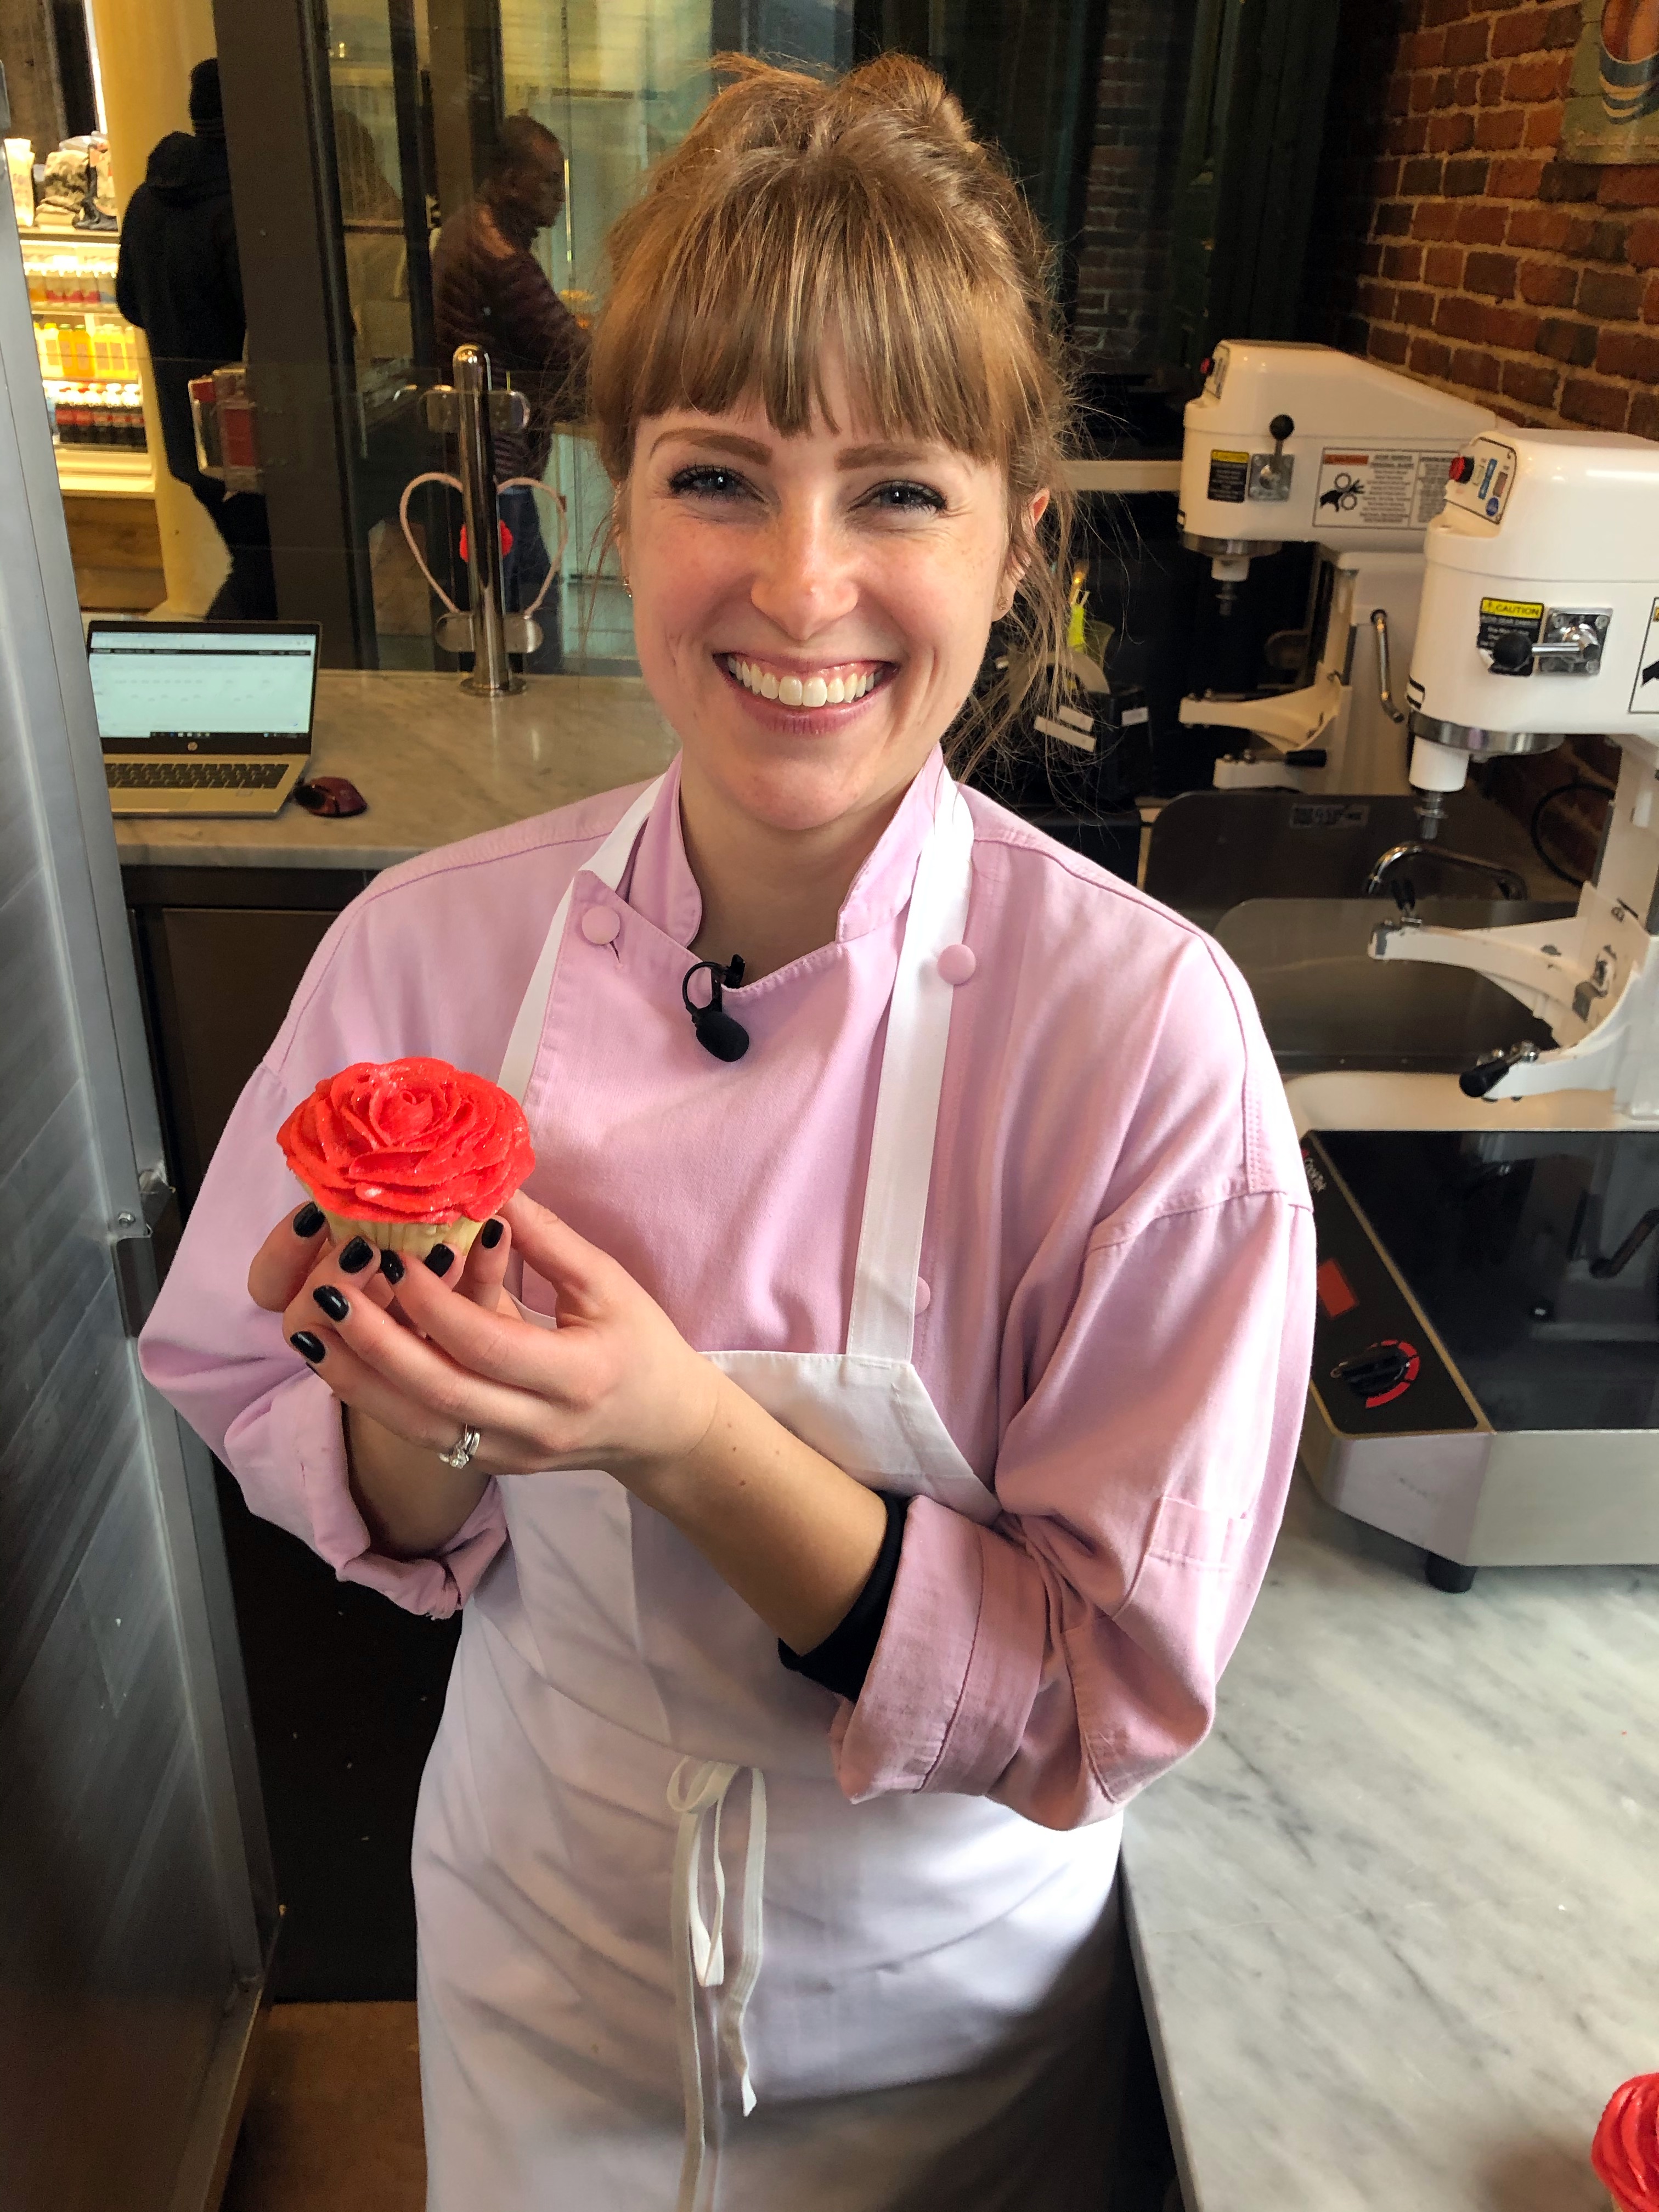 Sarah Wallace, Magnolia Bakery’s General Manager and competitor on Food Network’s Holiday Baking Championship, with a finished Valentine's cupcake